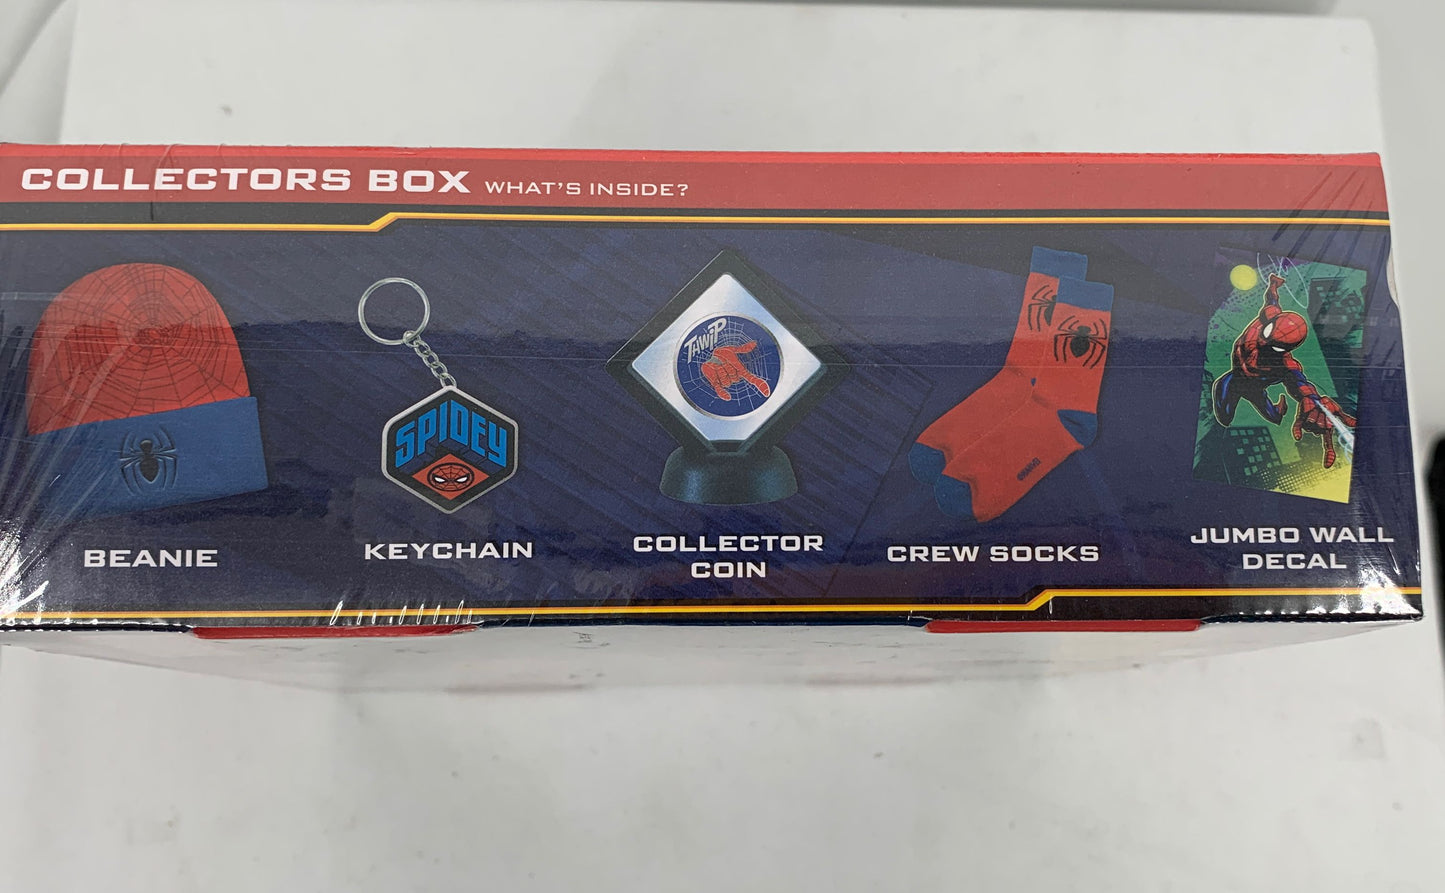 Culturefly Marvel Spider Man Collectors Box 5 Pieces New